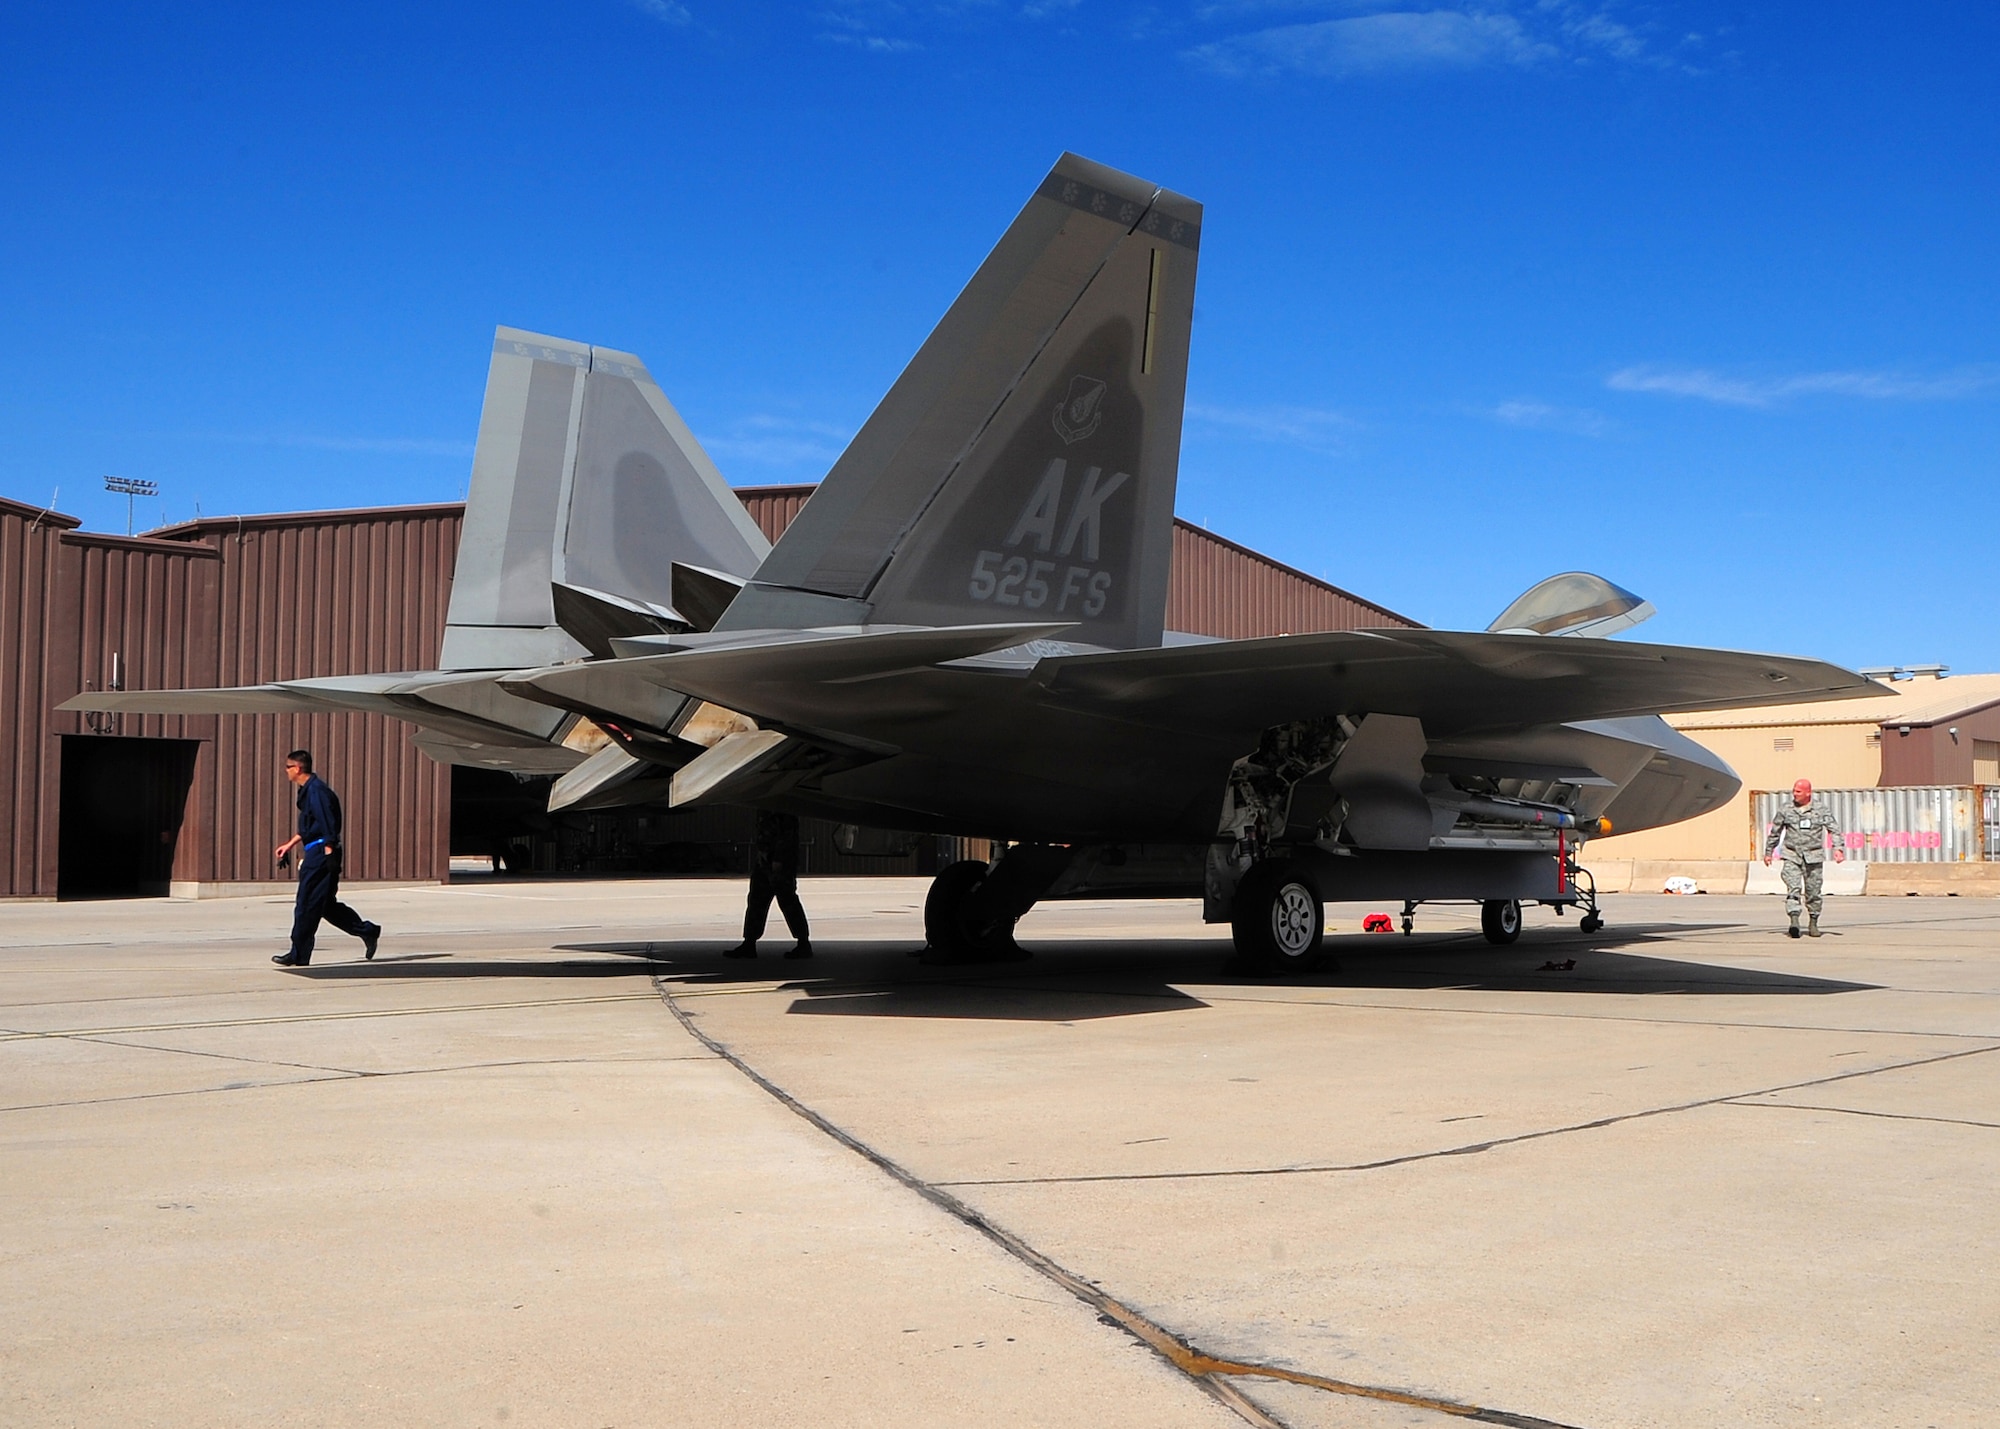 An F-22 Raptor from Elmendorf Air Force Base, Alaska beds down at Holloman Air Force Base, N.M. Feb. 17. Fourteen Raptors will stay at Holloman until the volcanic activity observed at Mount Redoubt near Elmendorf AFB subsides. (U.S. Air Force photo/TSgt Chris Flahive)